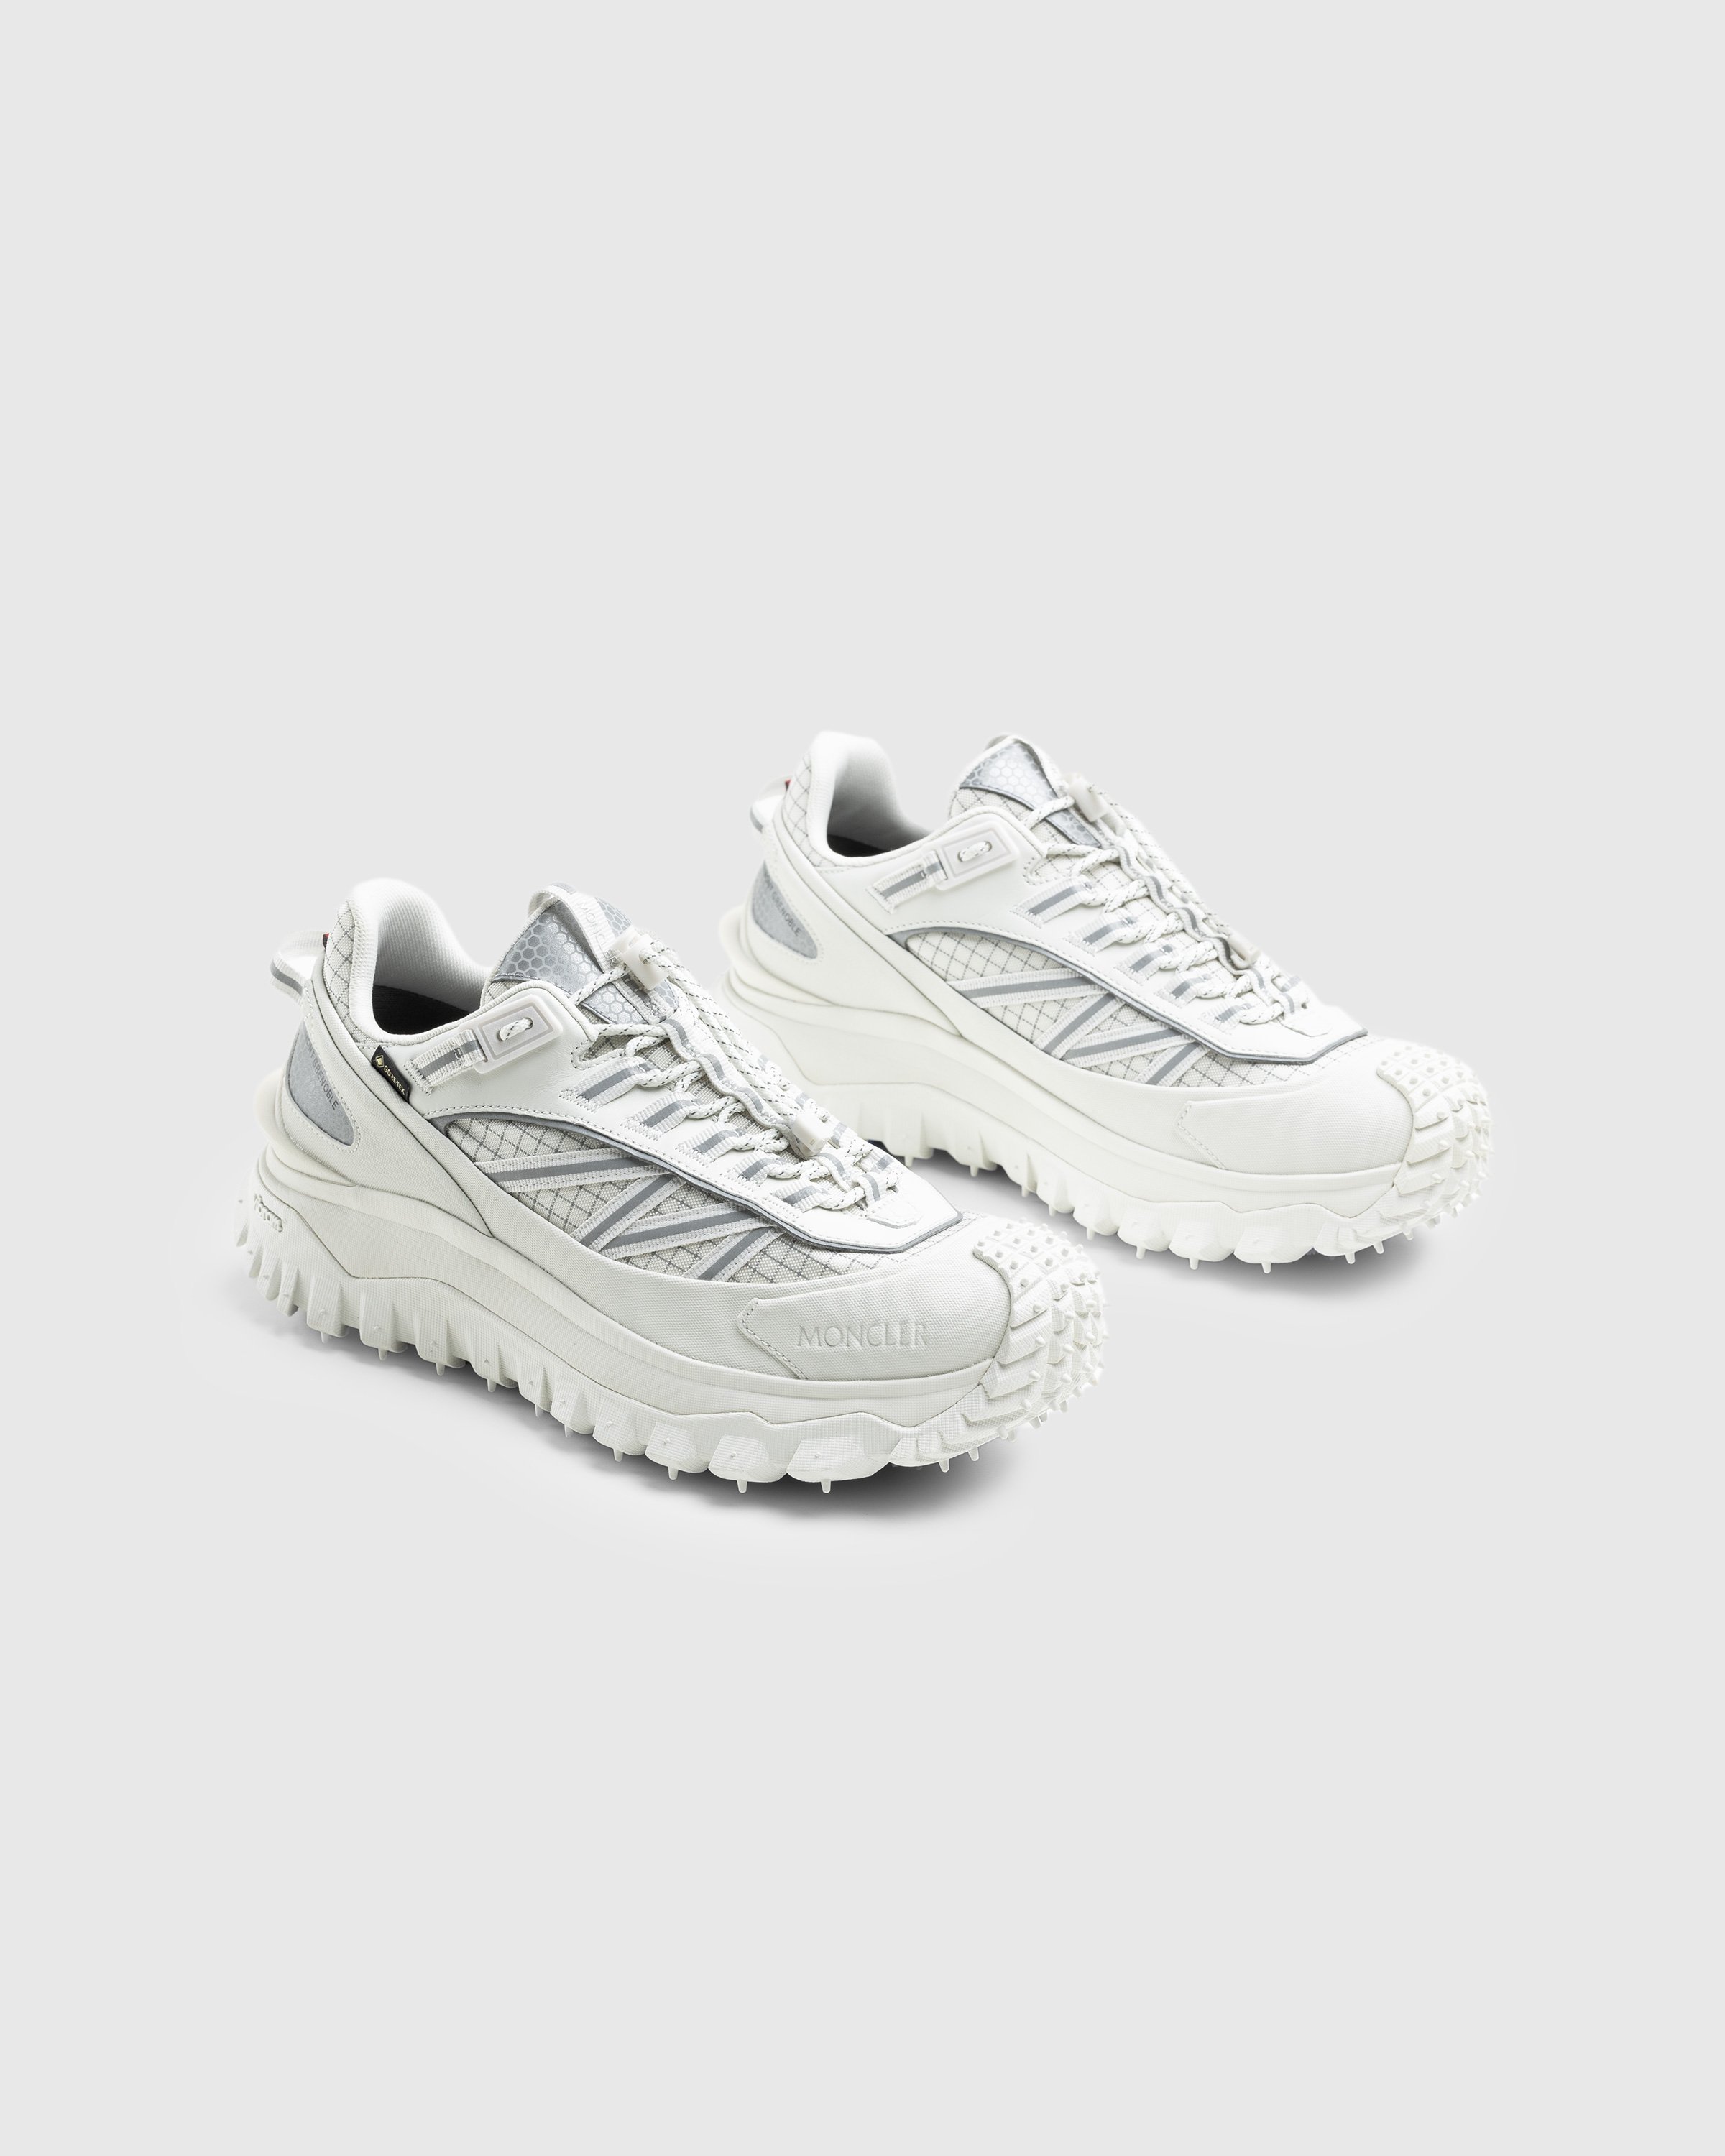 Moncler - Trailgrip Gtx Low Top Sneakers White - Footwear - White - Image 3